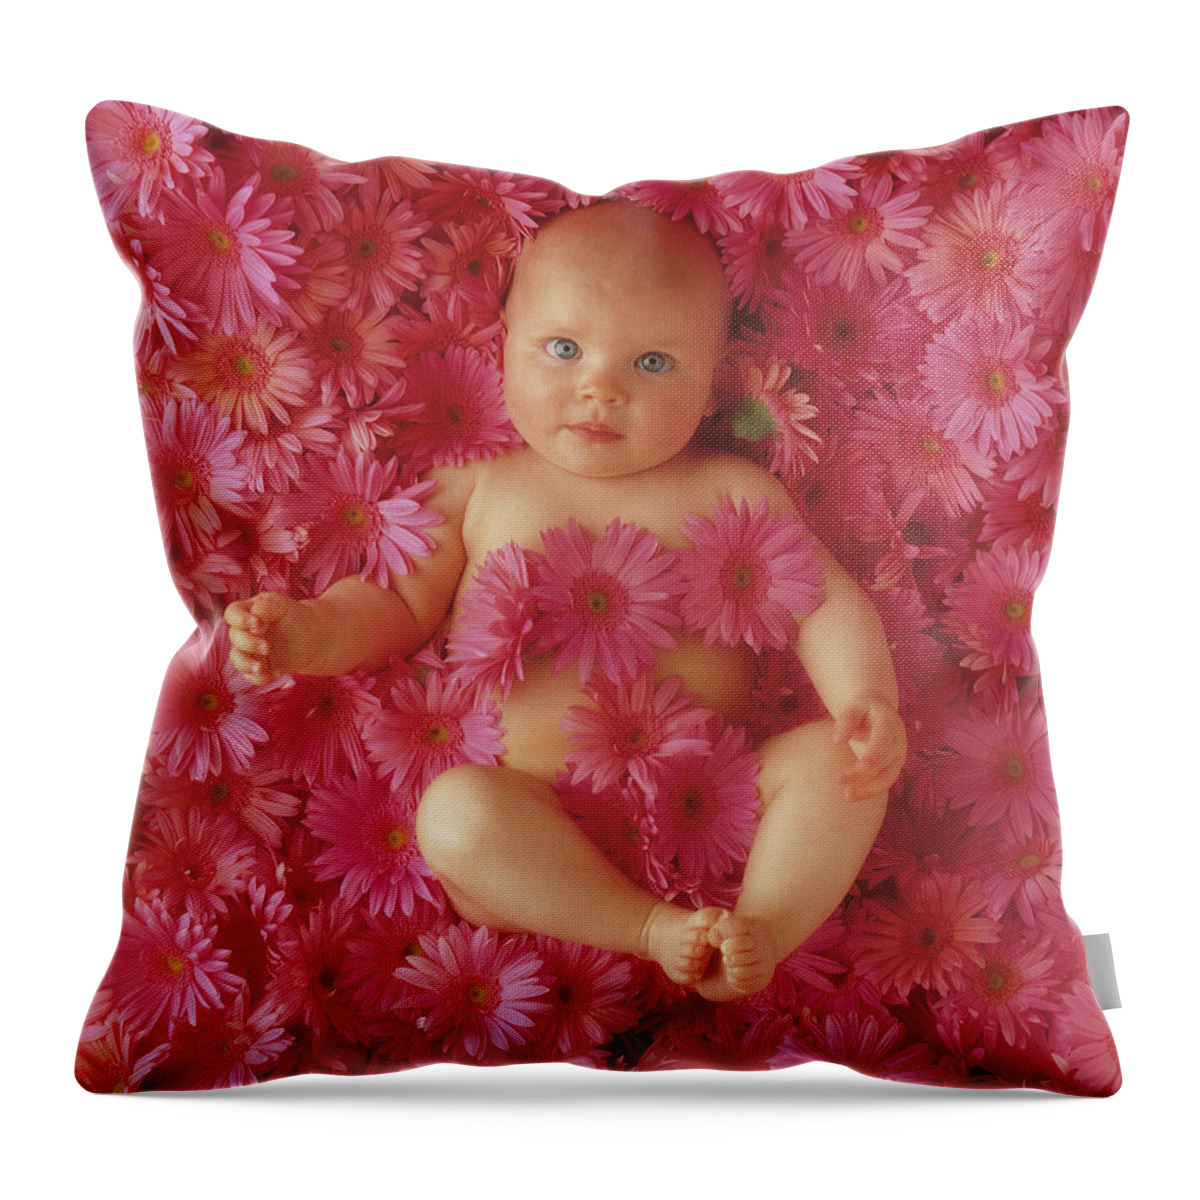 Daisies Throw Pillow featuring the photograph Pink Daisies by Anne Geddes